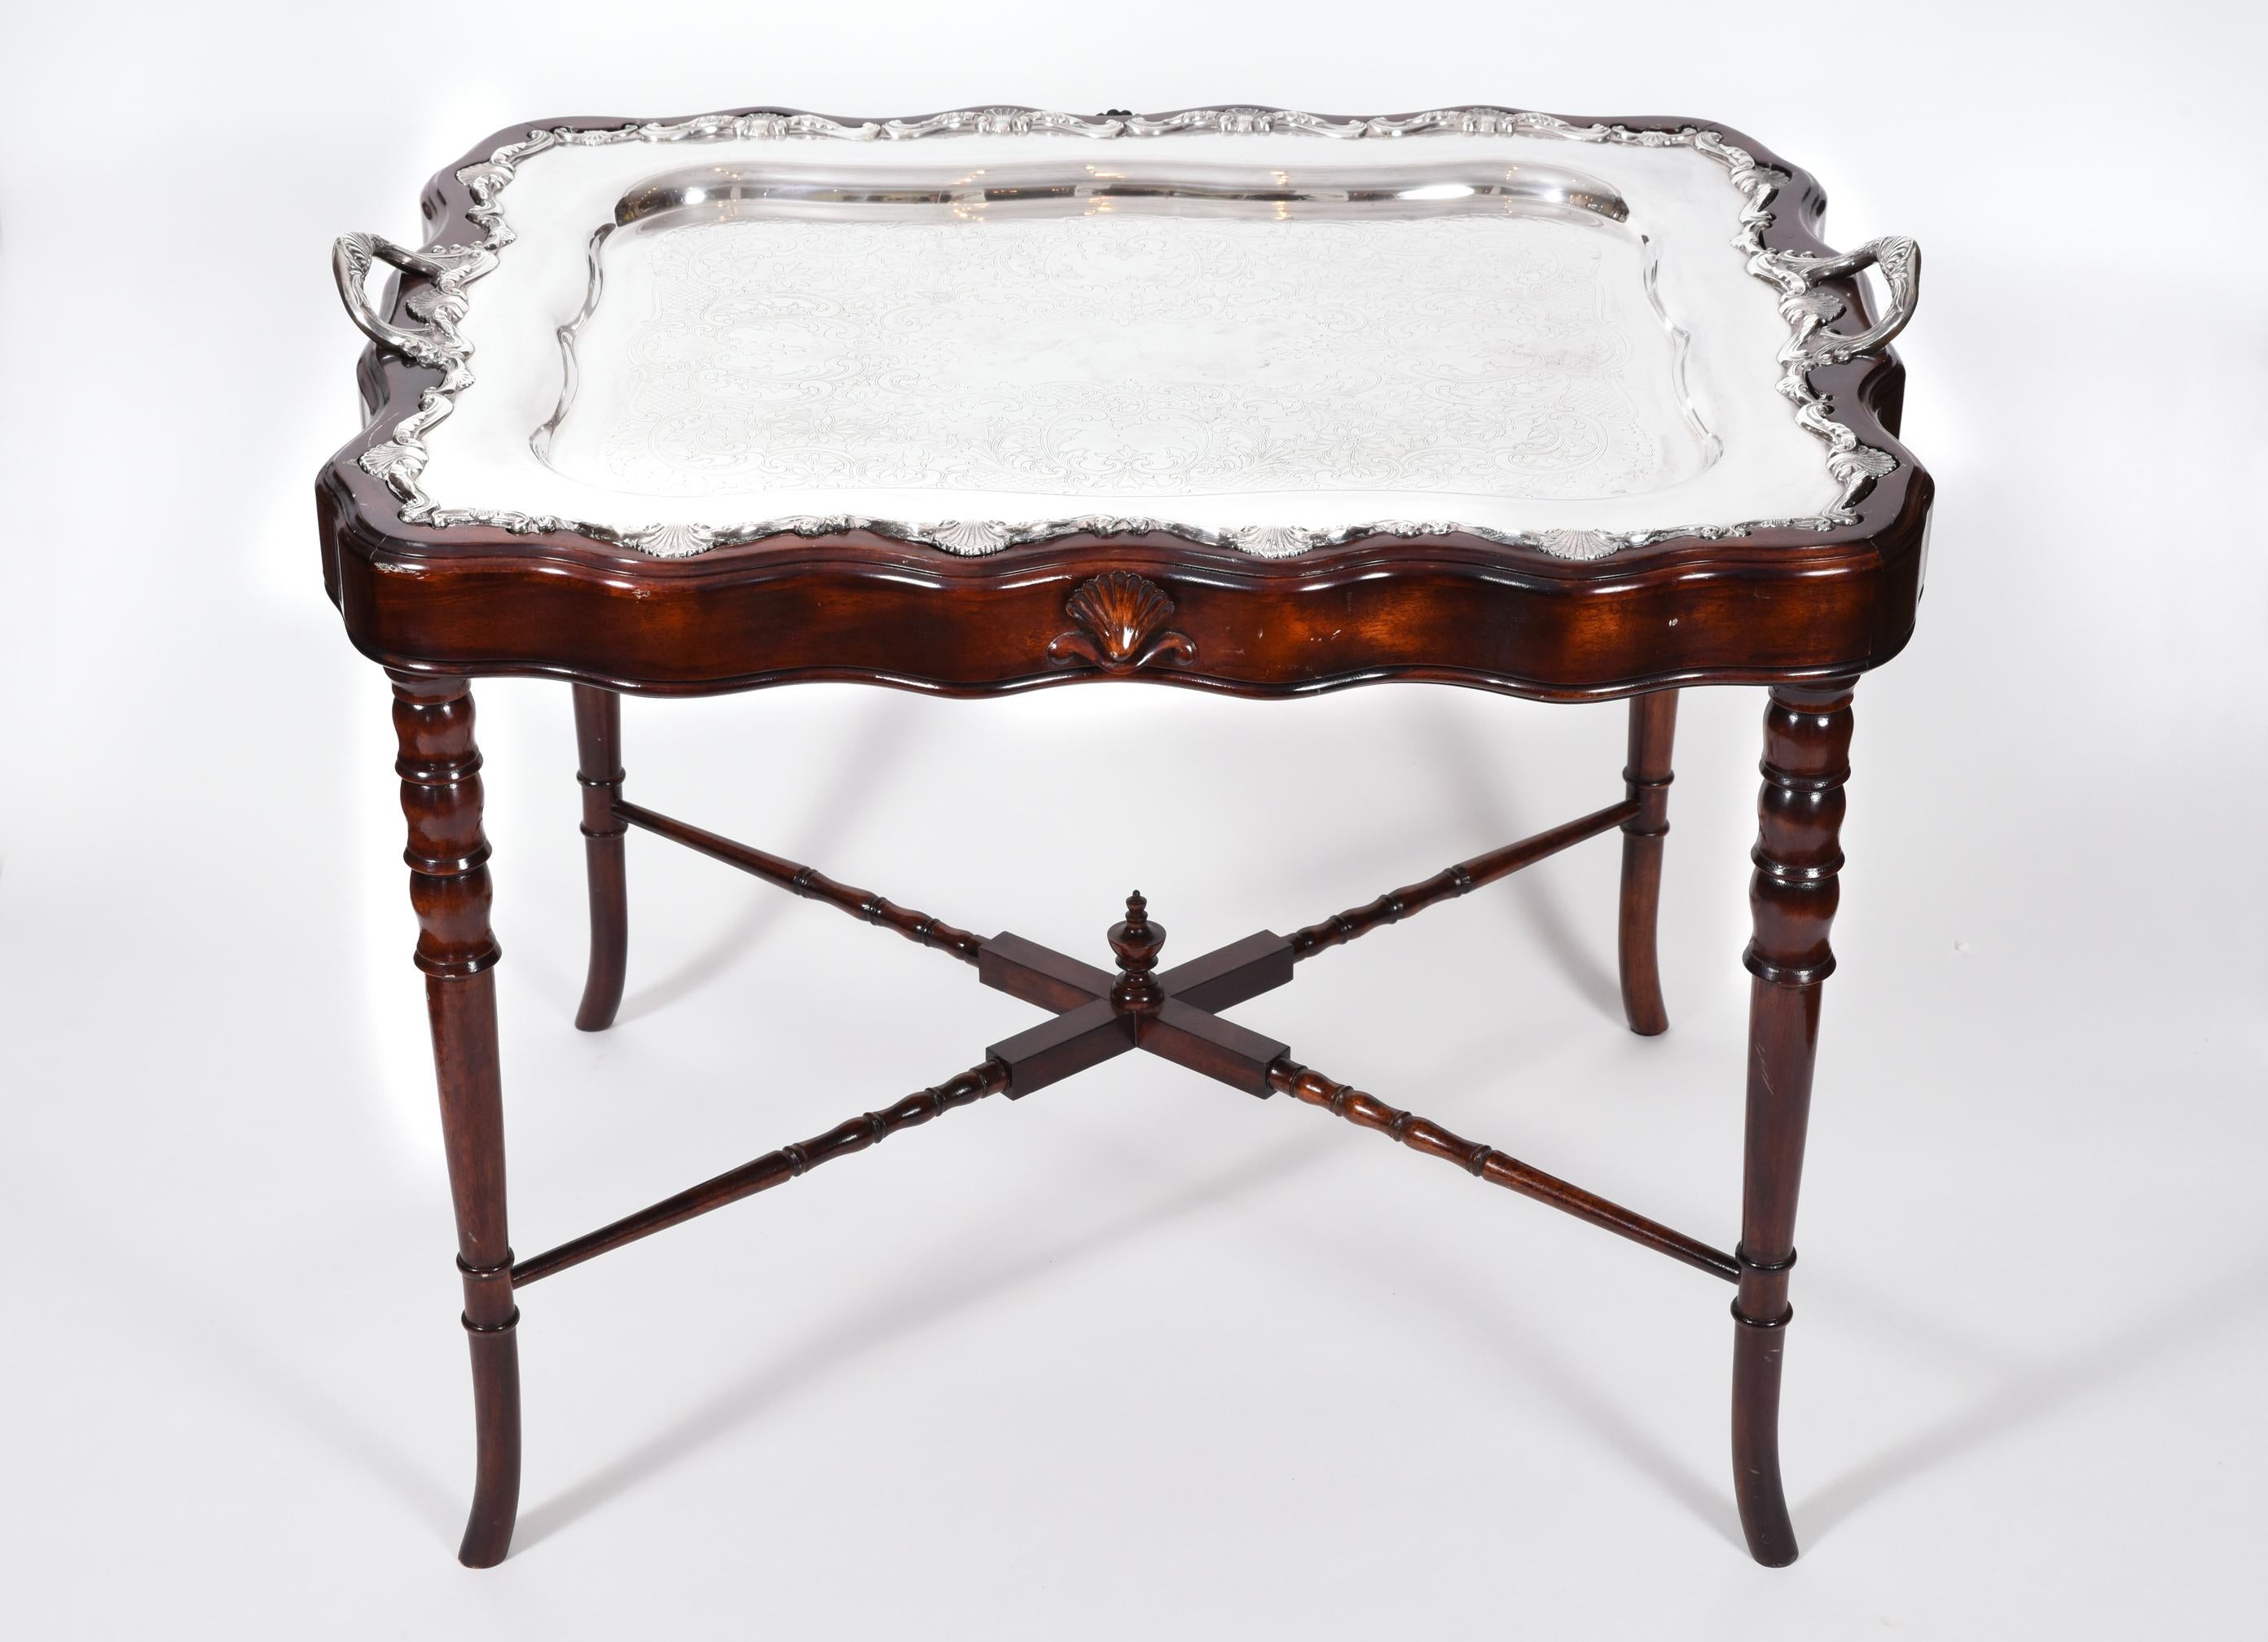 Vintage mahogany wood base frame completely removable silver plate tray table. The tray table is in excellent vintage condition. The table measure about 28 inches length X 21 inches width X 22 inches high.